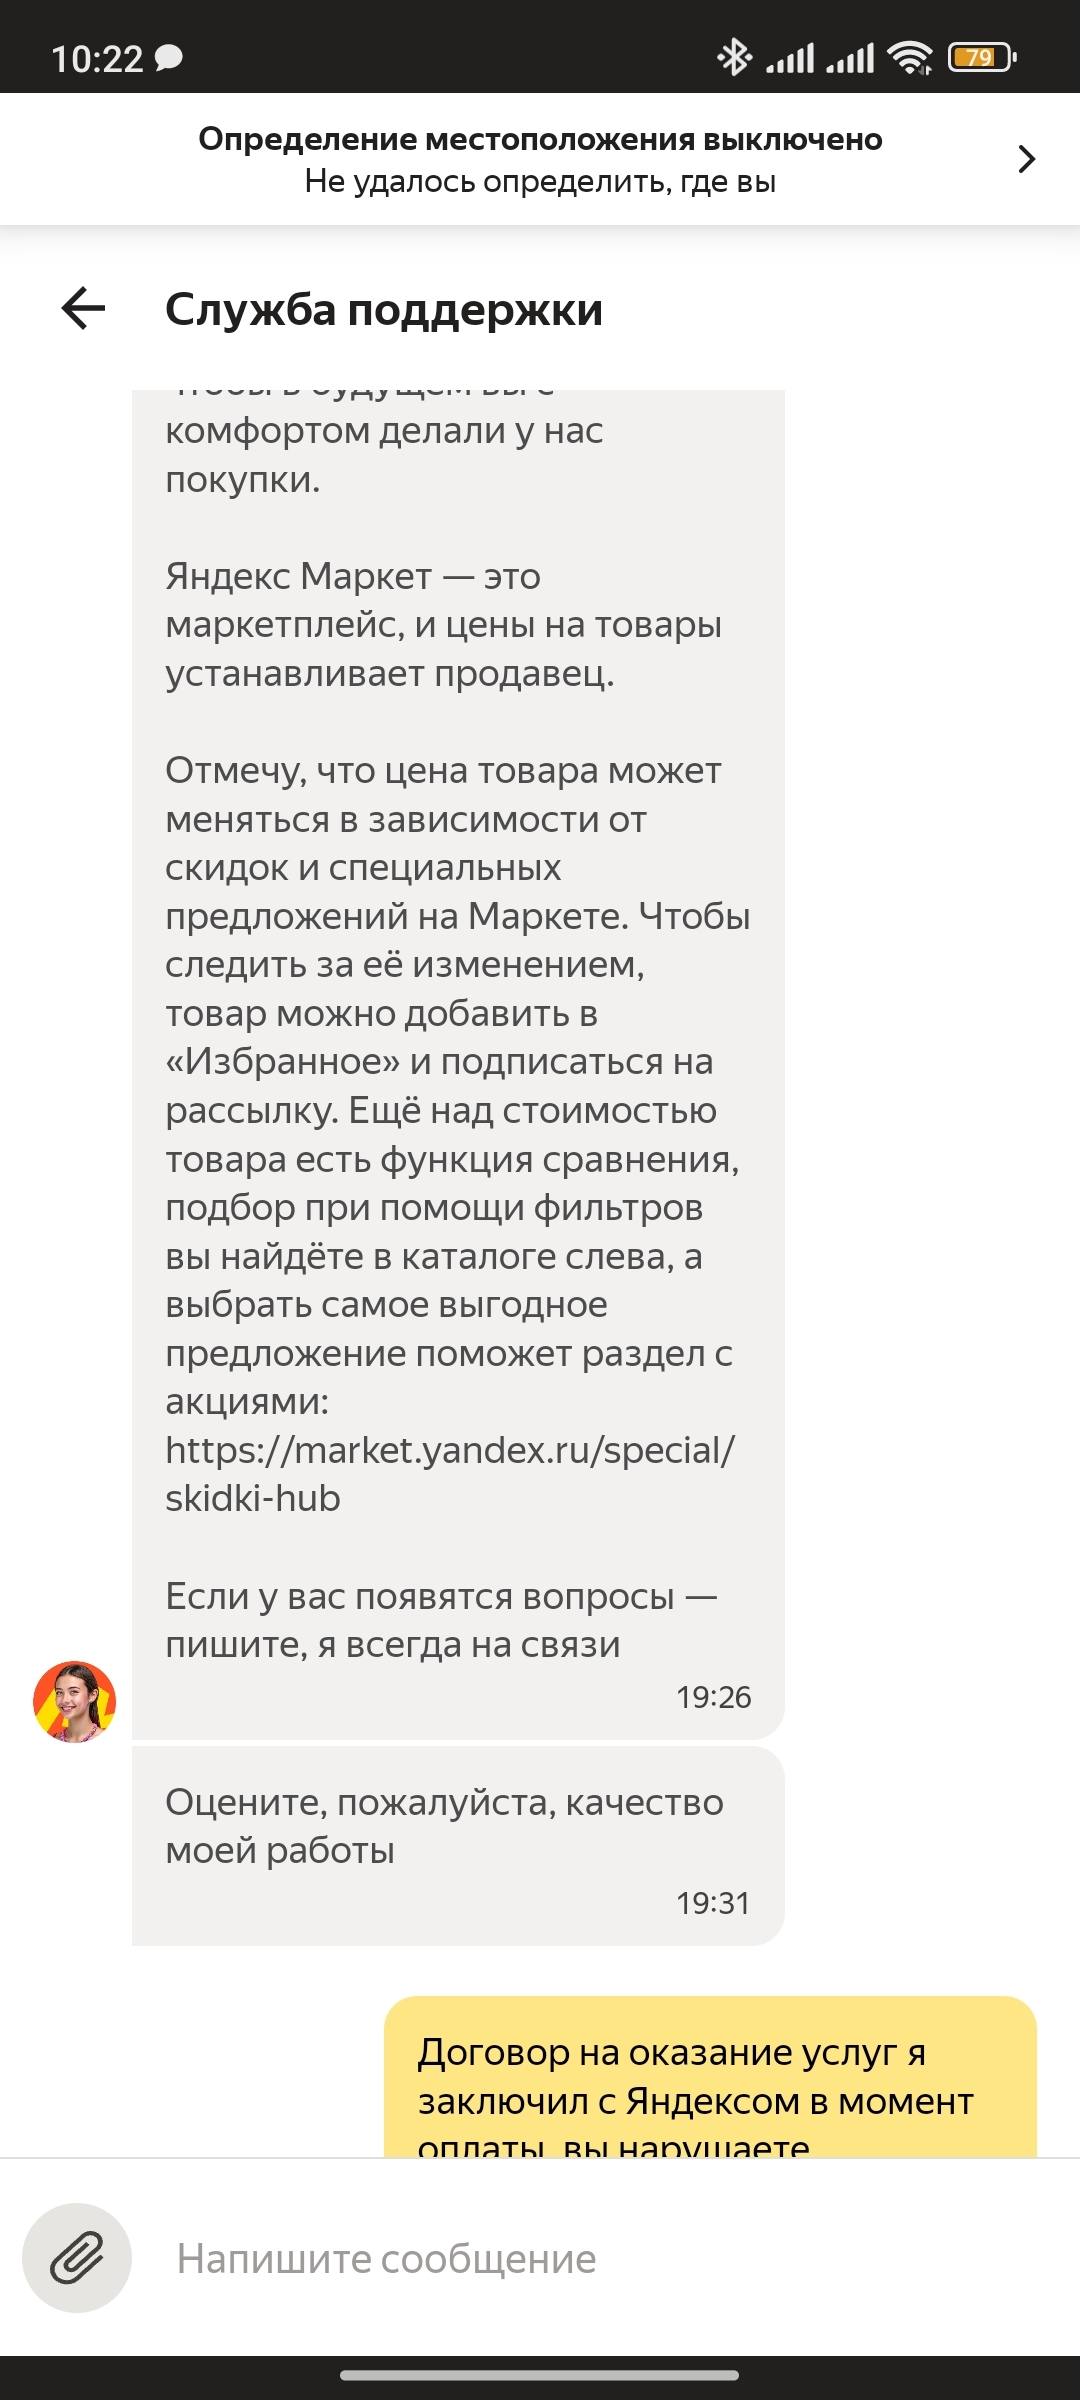 Communication with Yandex support service. Part No. 2 - My, Support service, Yandex., Correspondence, Longpost